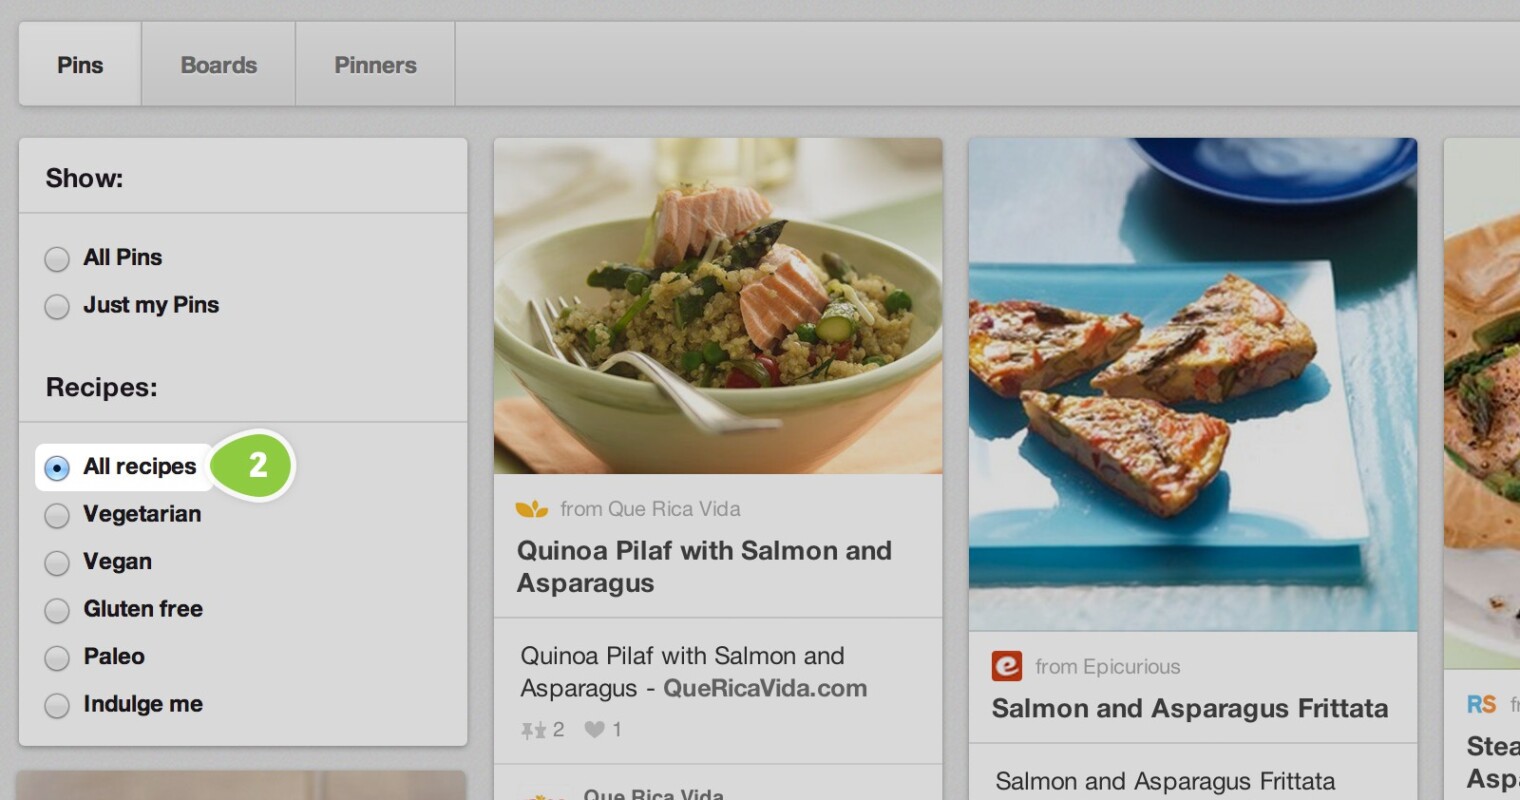 Pinterest Beefs Up Search Capabilities With More Efficient Way To Find Recipes